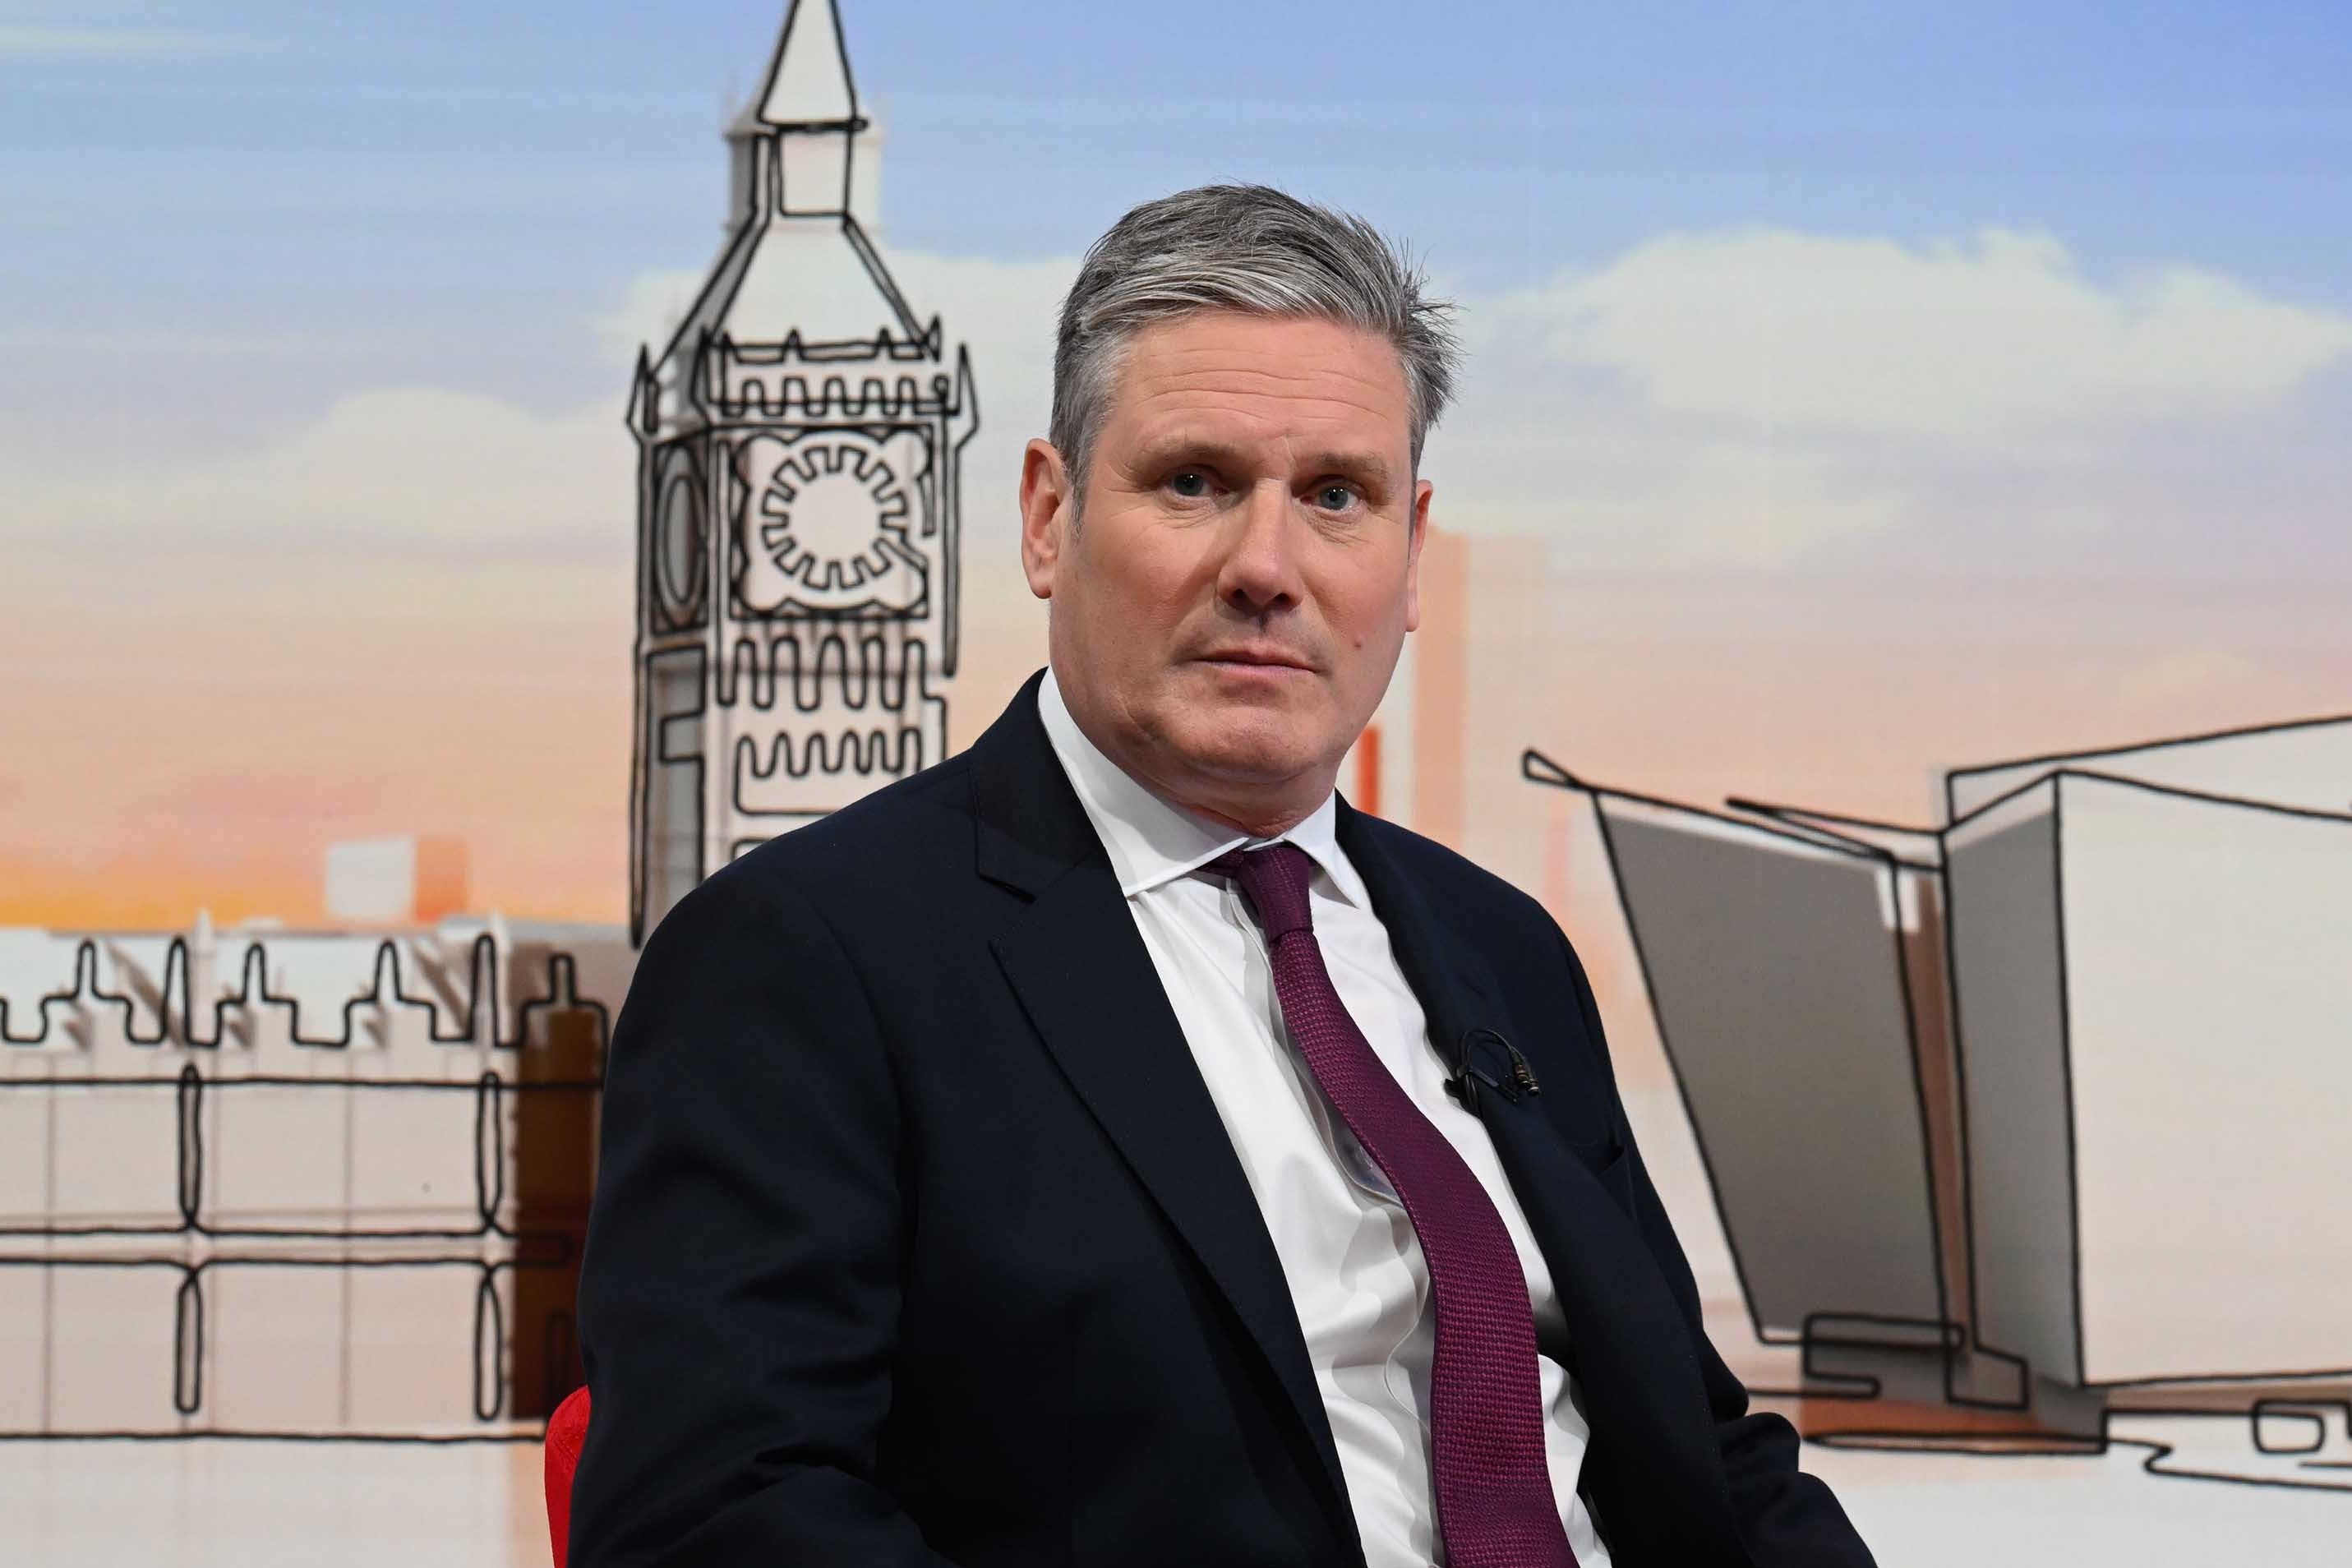 It is, at this point, very clearly Starmer’s election to lose